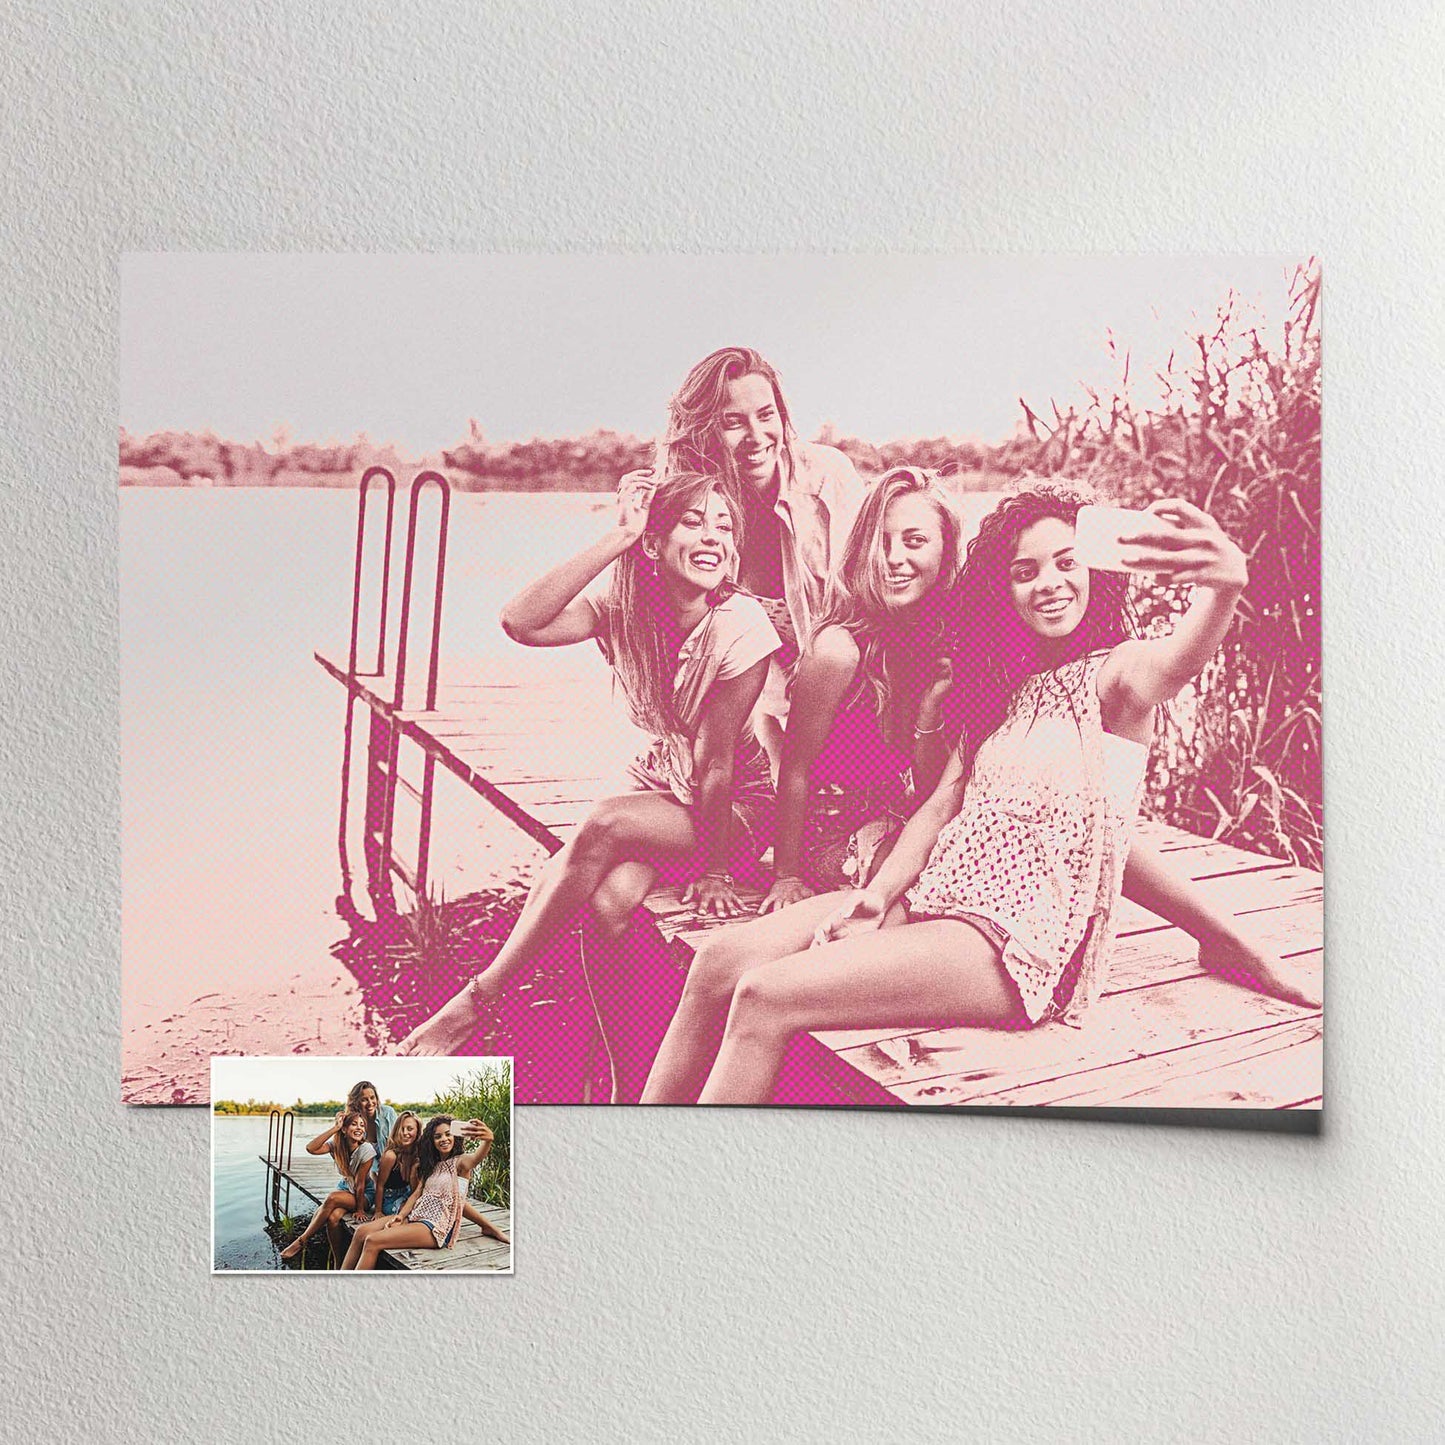 Personalised Pink Pop Art Prints - a vibrant and energetic addition to your space. Our retro halftone pop art filter gives your photo a unique and stylish look, with pink hues that radiate elegance and charm